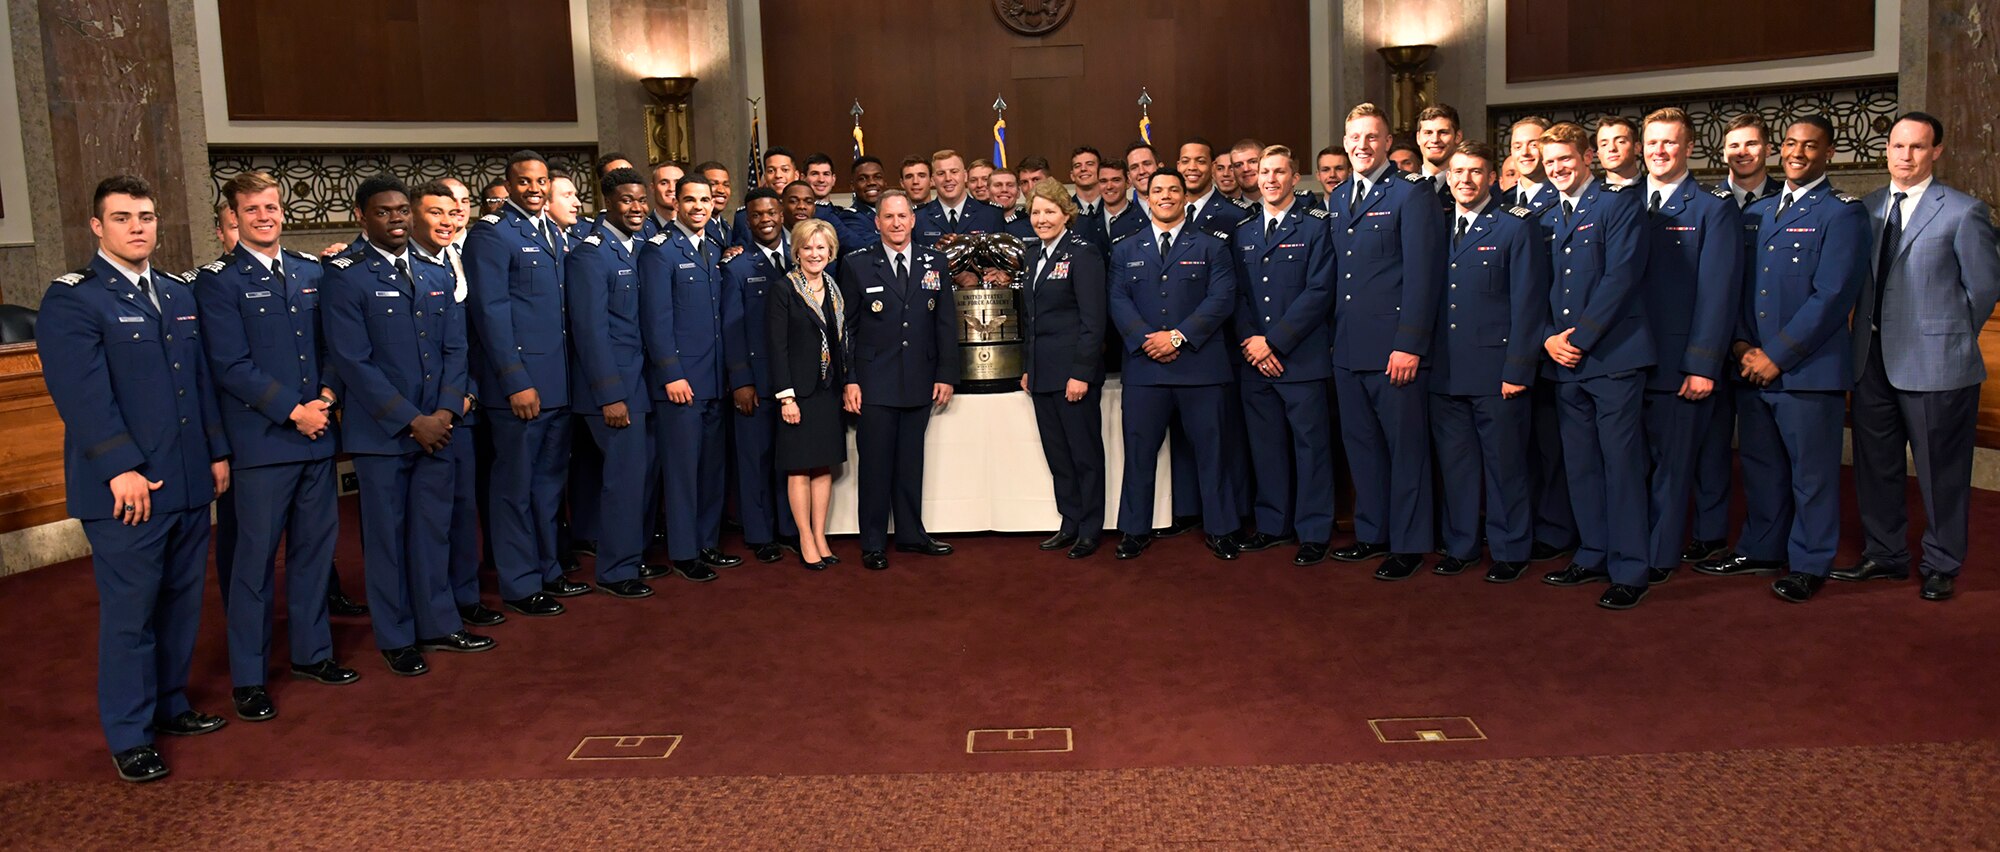 Air Force Chief of Staff Gen. David L. Goldfein, his wife Dawn and Air Force Academy Superintendent Lt. Gen. Michelle Johnson pose for a photo during the Congressional social congratulating the U.S. Air Force Academy football team for winning the Commander in Chief’s Trophy, at the Dirkson Senate Office Building in Washington, D.C., May 1, 2017. (U.S. Air Force photo/Wayne A. Clark)